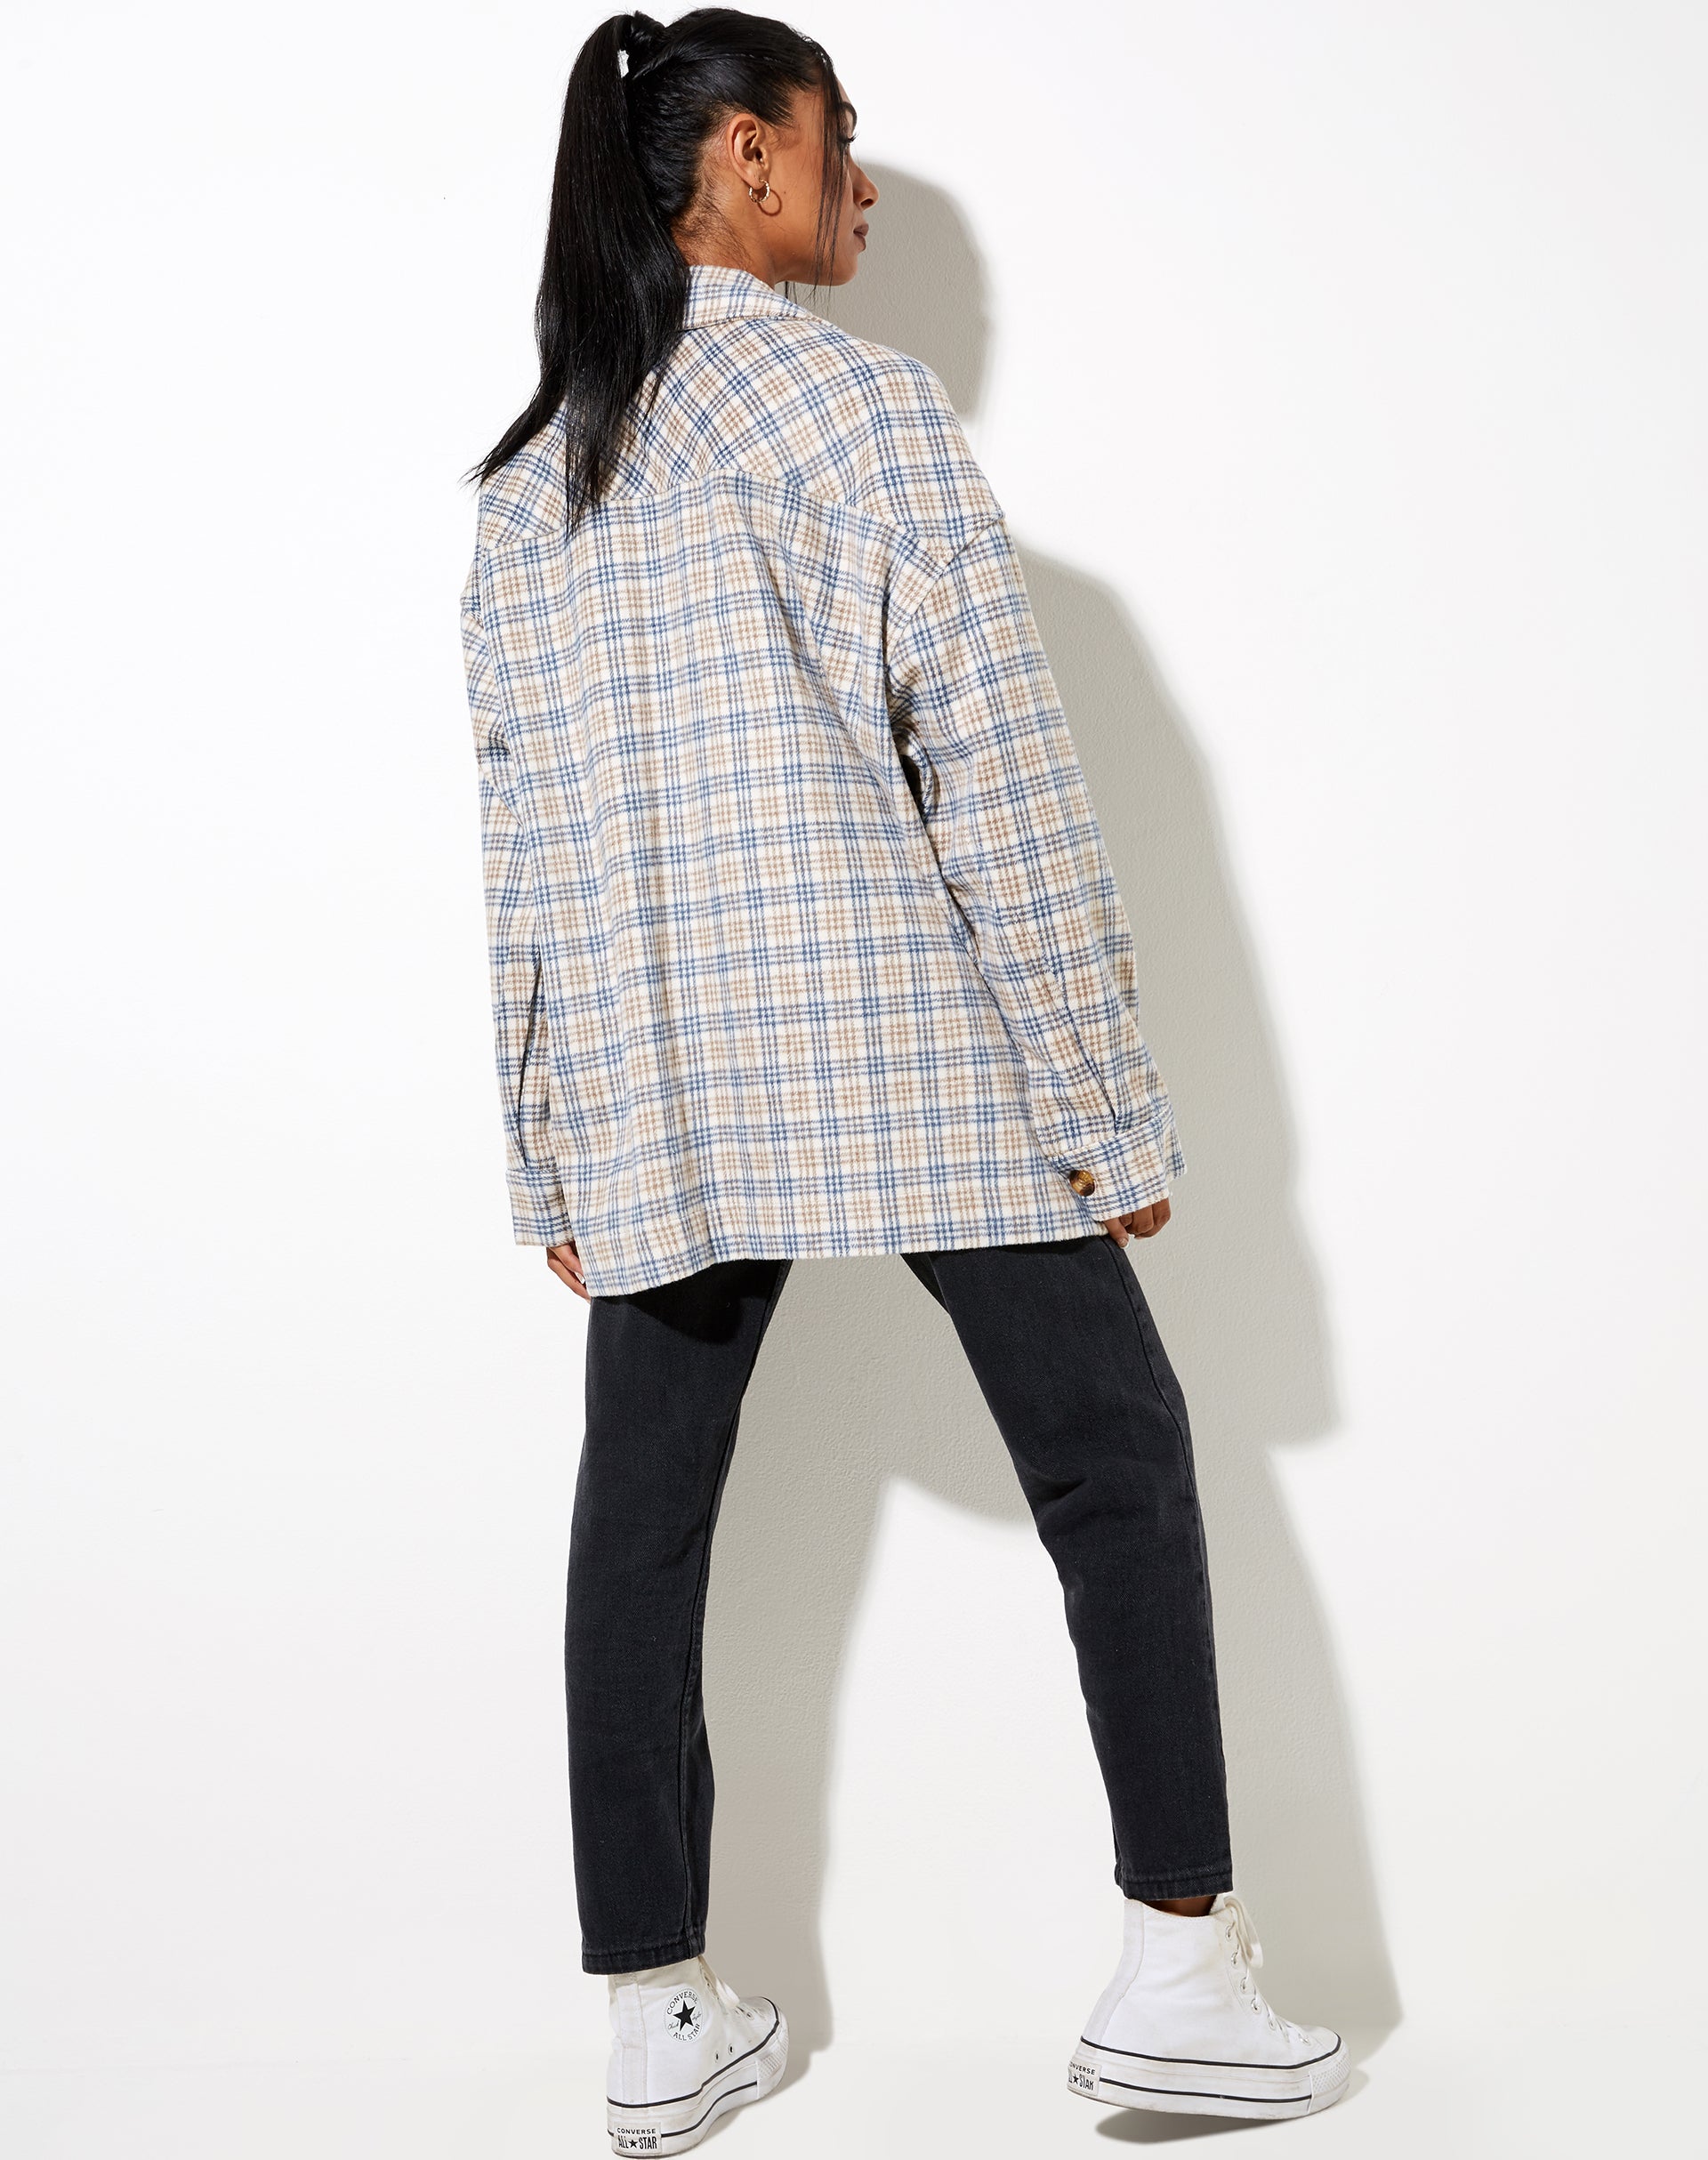 Image of Marcel Shirt in Small Check White Blue Tan